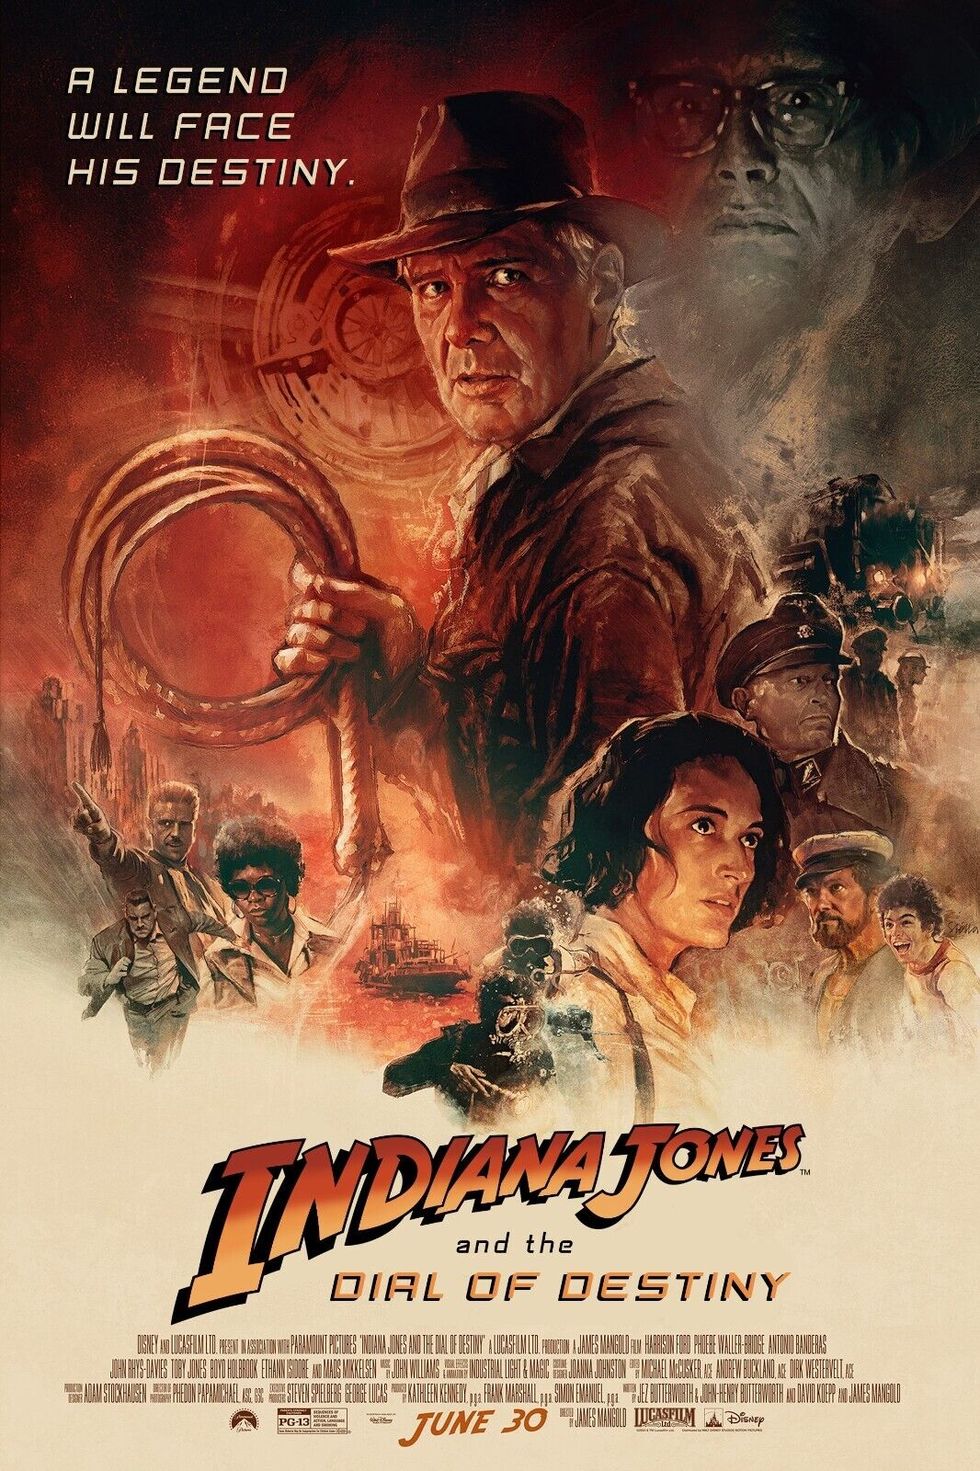 How to Watch the Indiana Jones Movies in Order, Chronologically